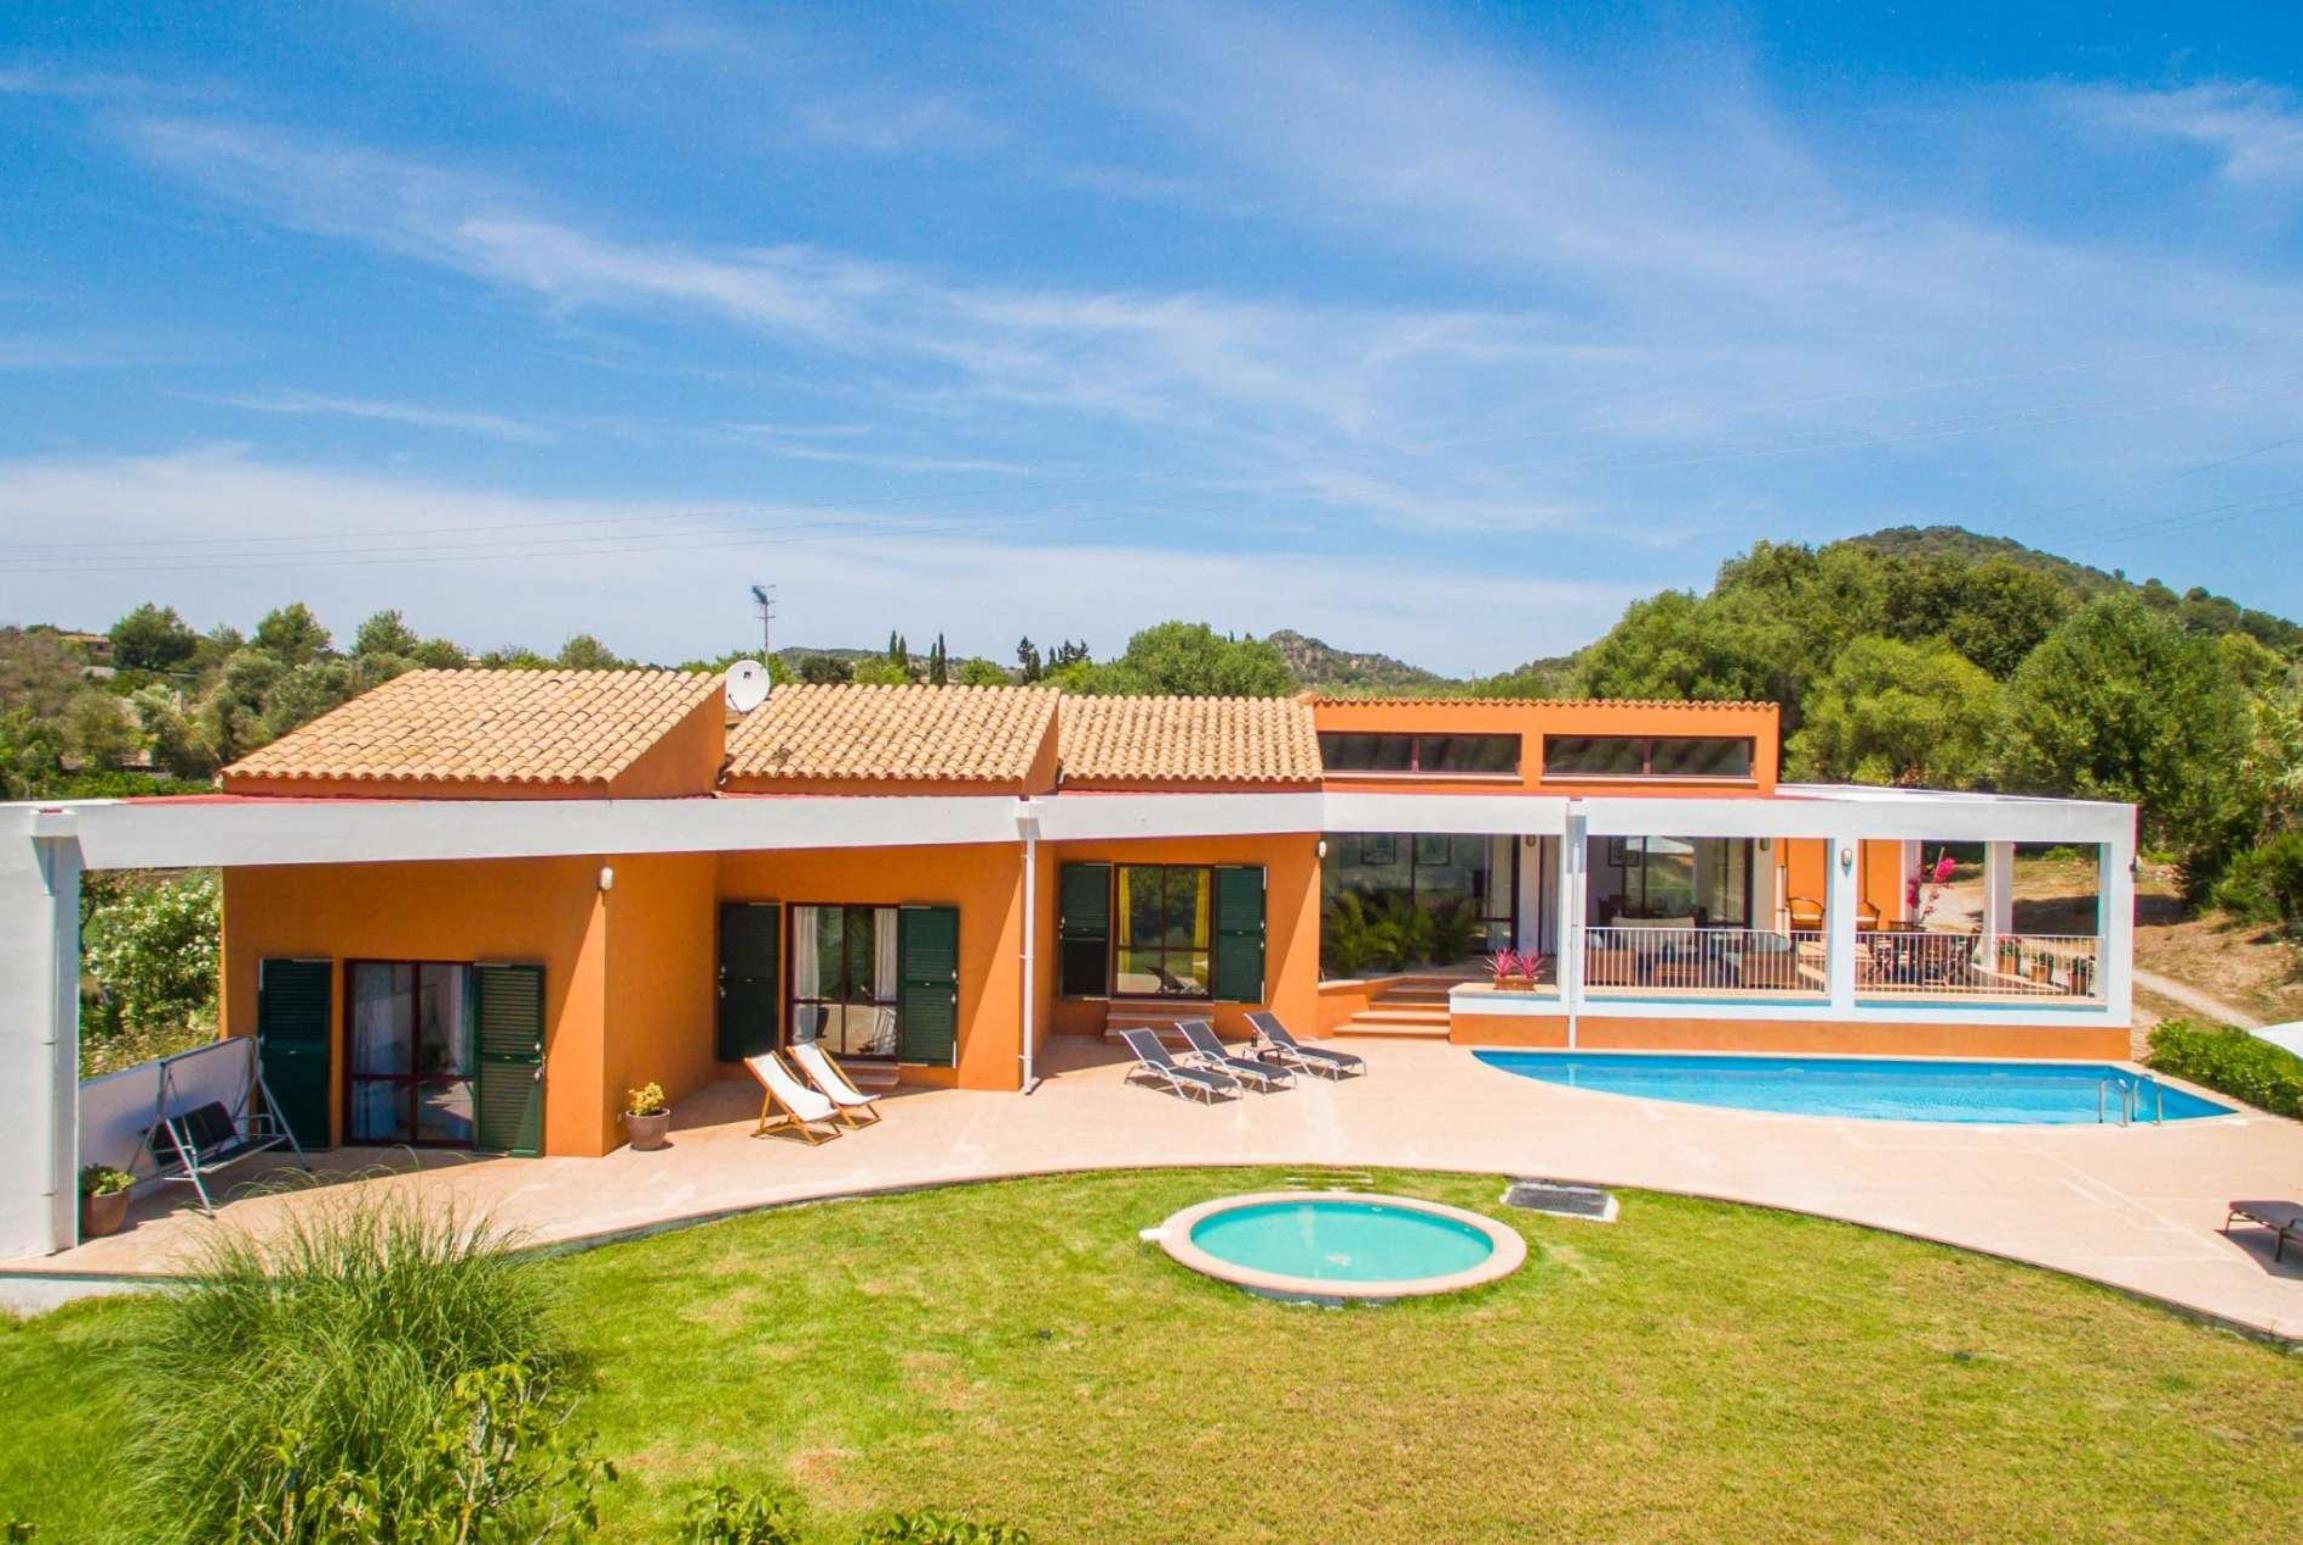 Property Image 1 - Family-friendly and modern finca.